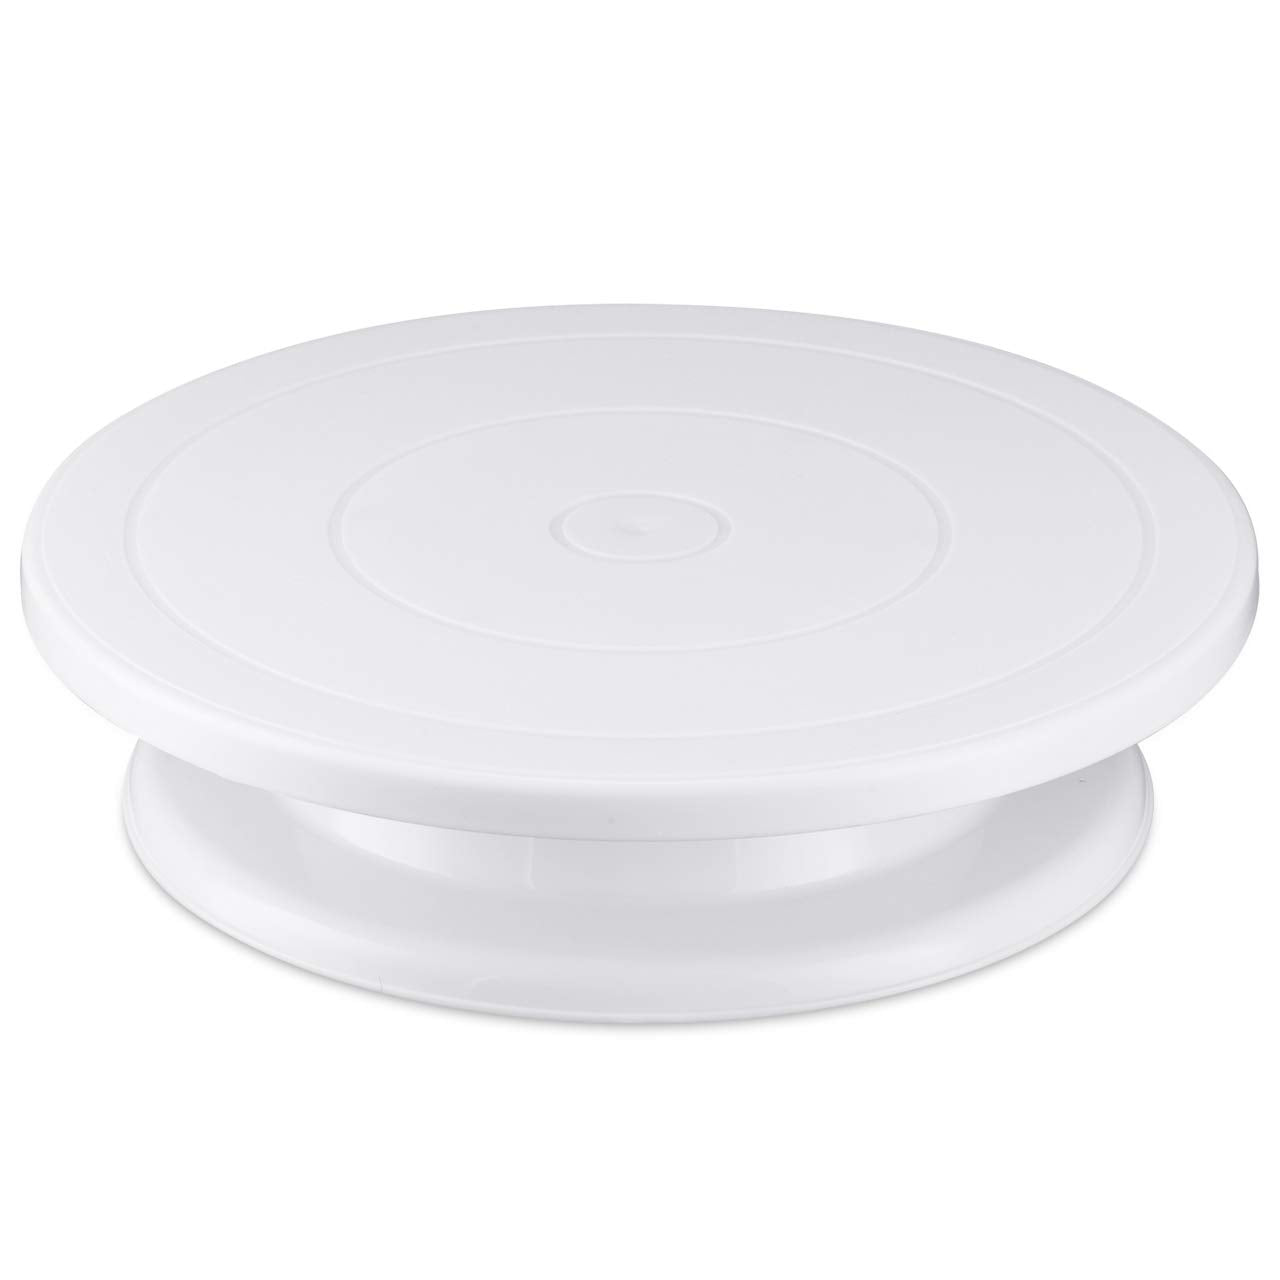 11 Rotating Cake Turntable White Cake Stand Spinner for Cake Decorations,  Pastries, Cupcakes